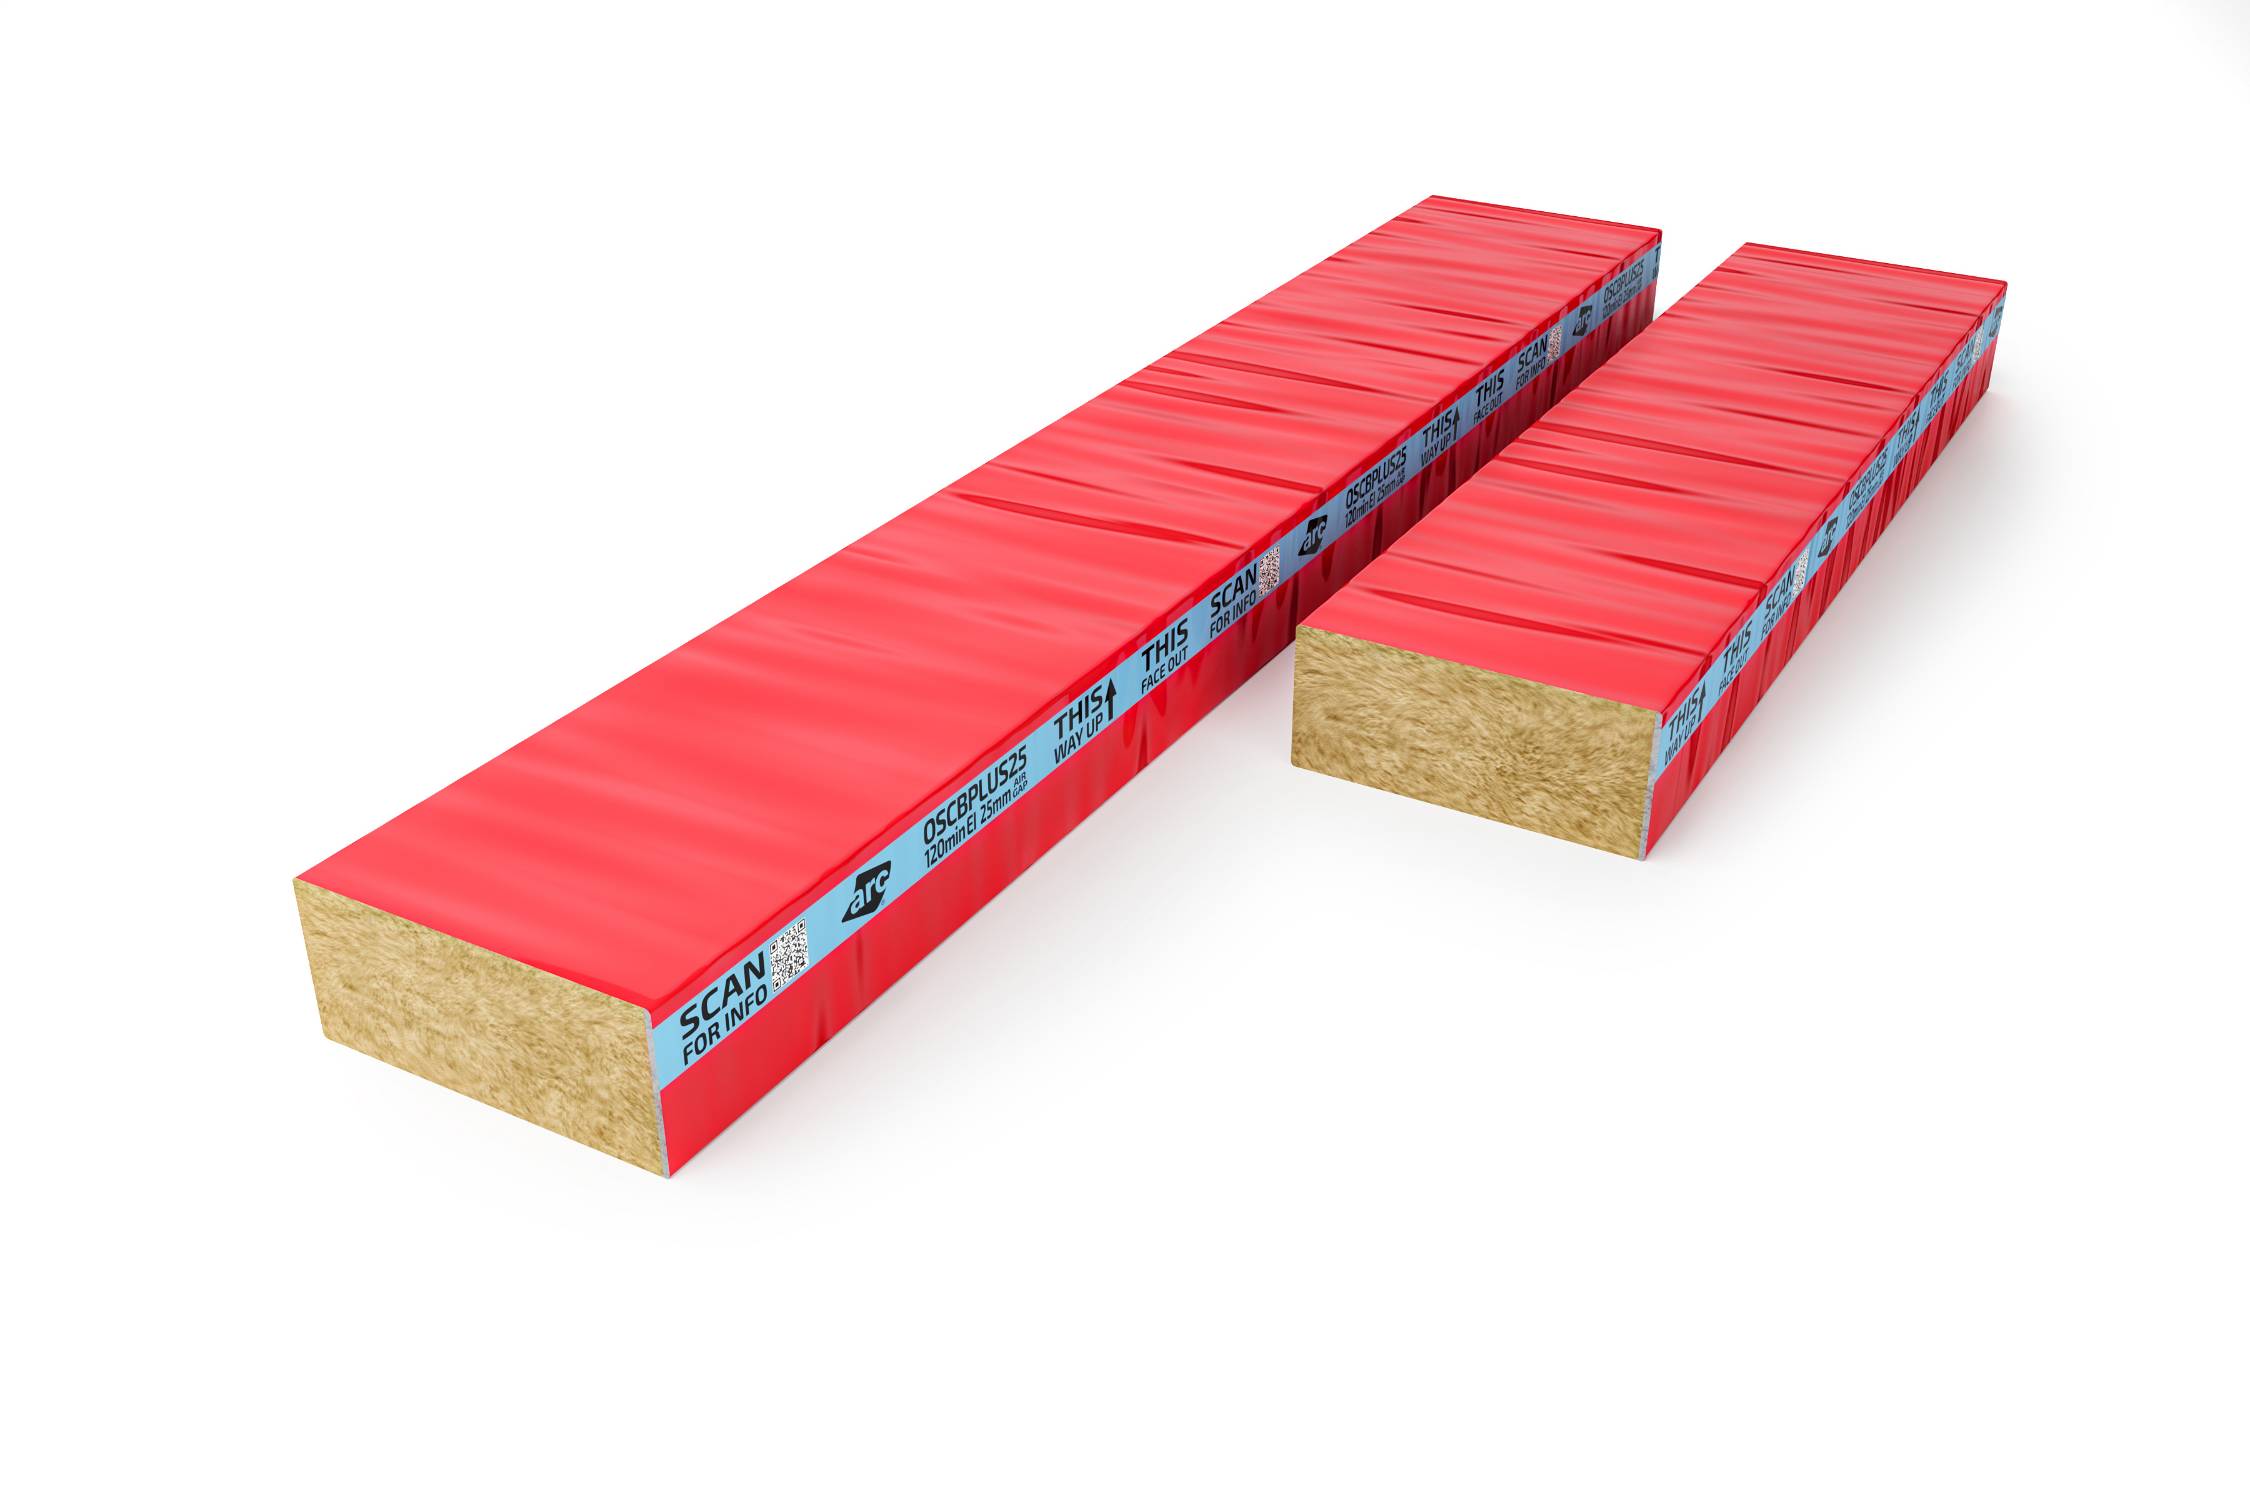 Open State Cavity Barrier (OSCB) - Ventilated cavity barrier